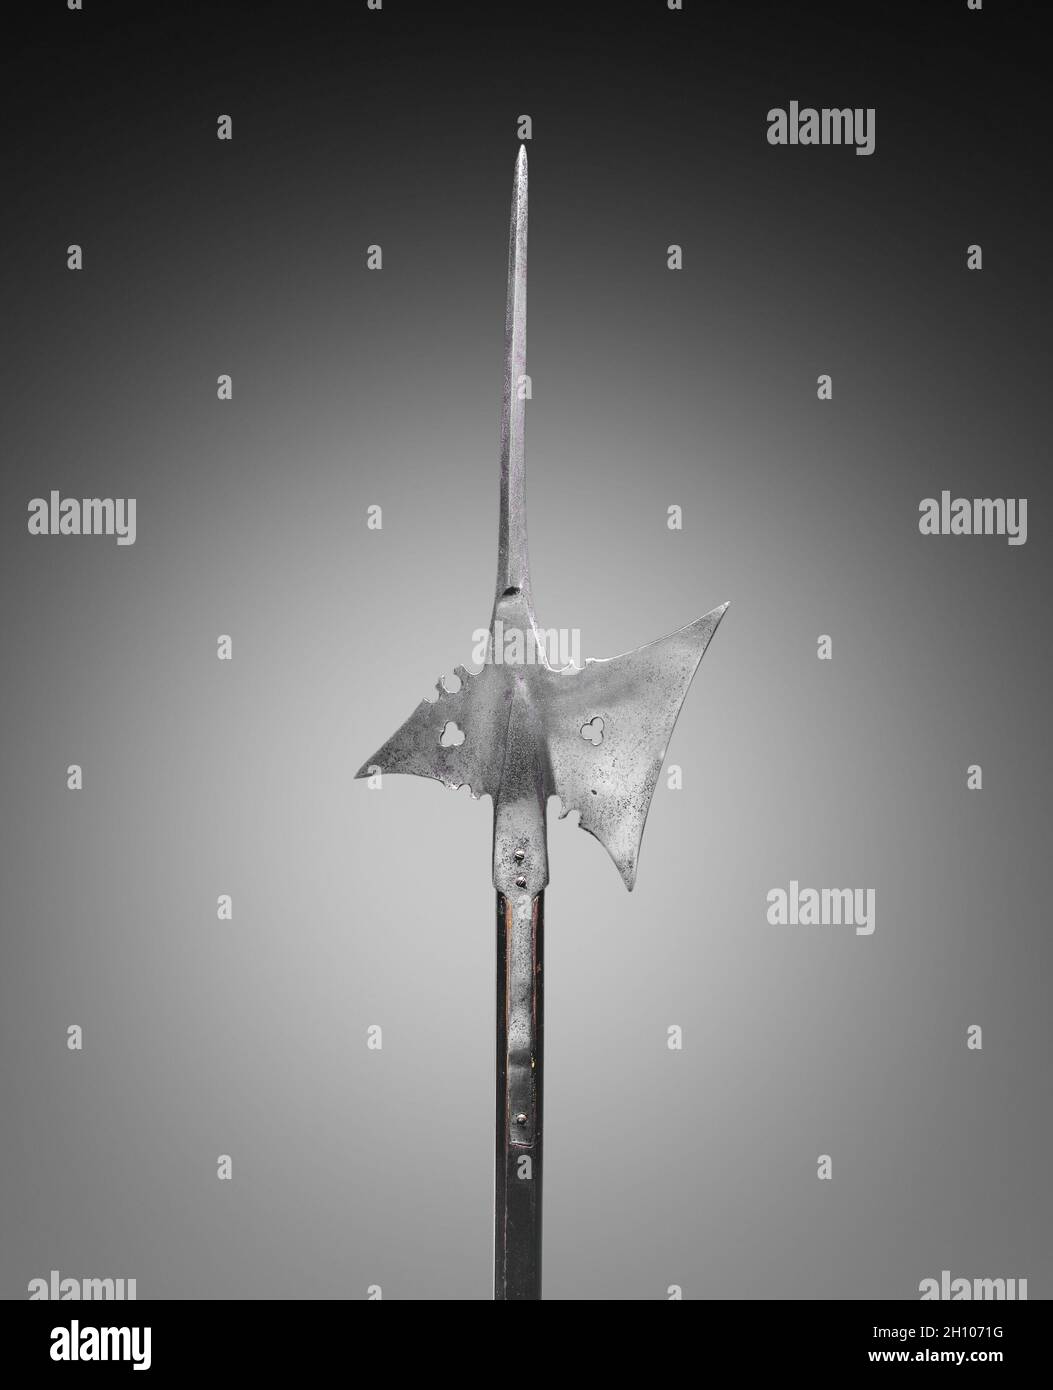 Halberd, c. 1550. Germany, 16th century. Steel, with pierced trefoils; wood haft (rectangular with planed corners); overall: 200.7 cm (79 in.); blade: 25.4 cm (10 in.).  The most effecient weapons used by the infantry (foot soldiers) during the 15th and 16th centuries were pole arms (or staff weapons). The halberd, like the examples shown here, was a weapon of great versatility. The word halberd comes from the German words Halm (a staff) and Barte (an axe). The halberd is, in fact, an axe mounted on a long pole with a very specialized shape and function: the axe blade was used for hacking, the Stock Photo